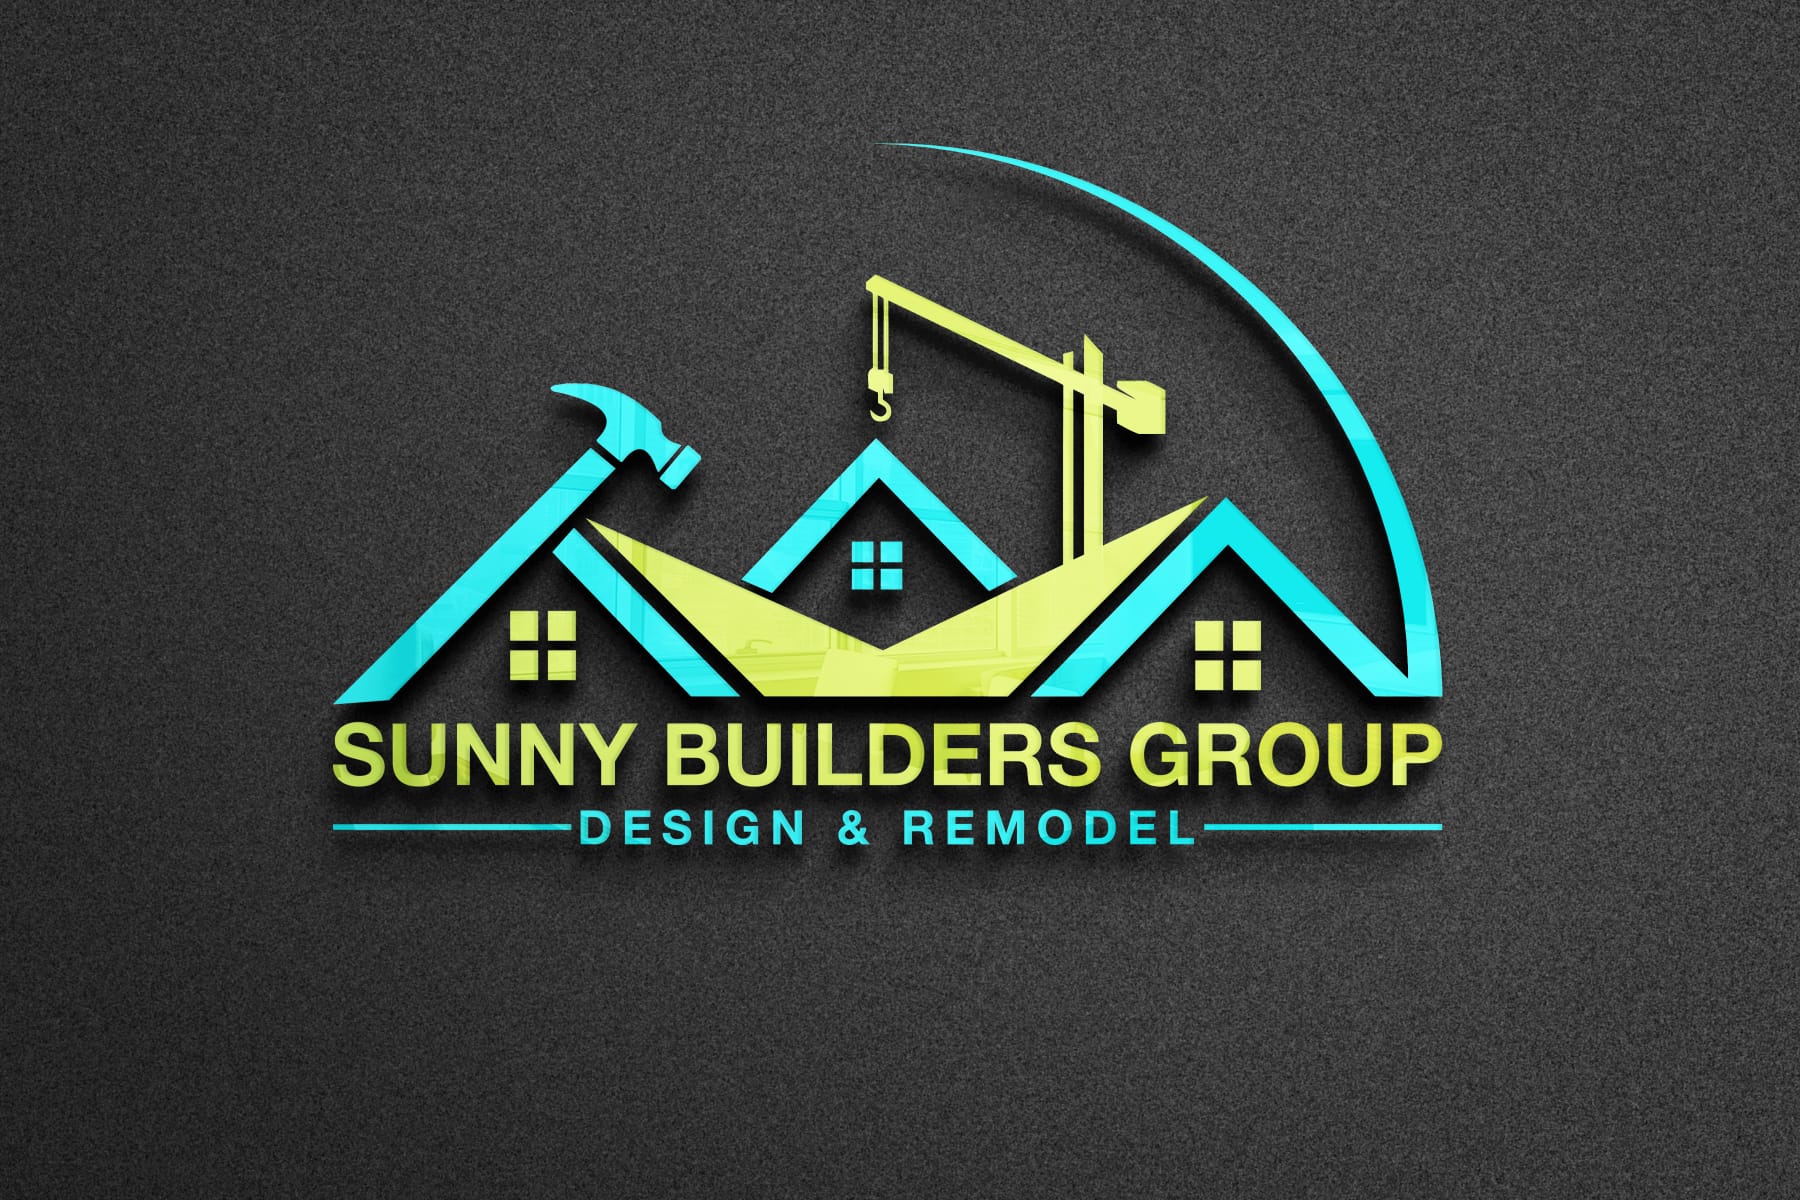 Sunny Builders Group Brings Superior Paver Installation to San Diego Backyards